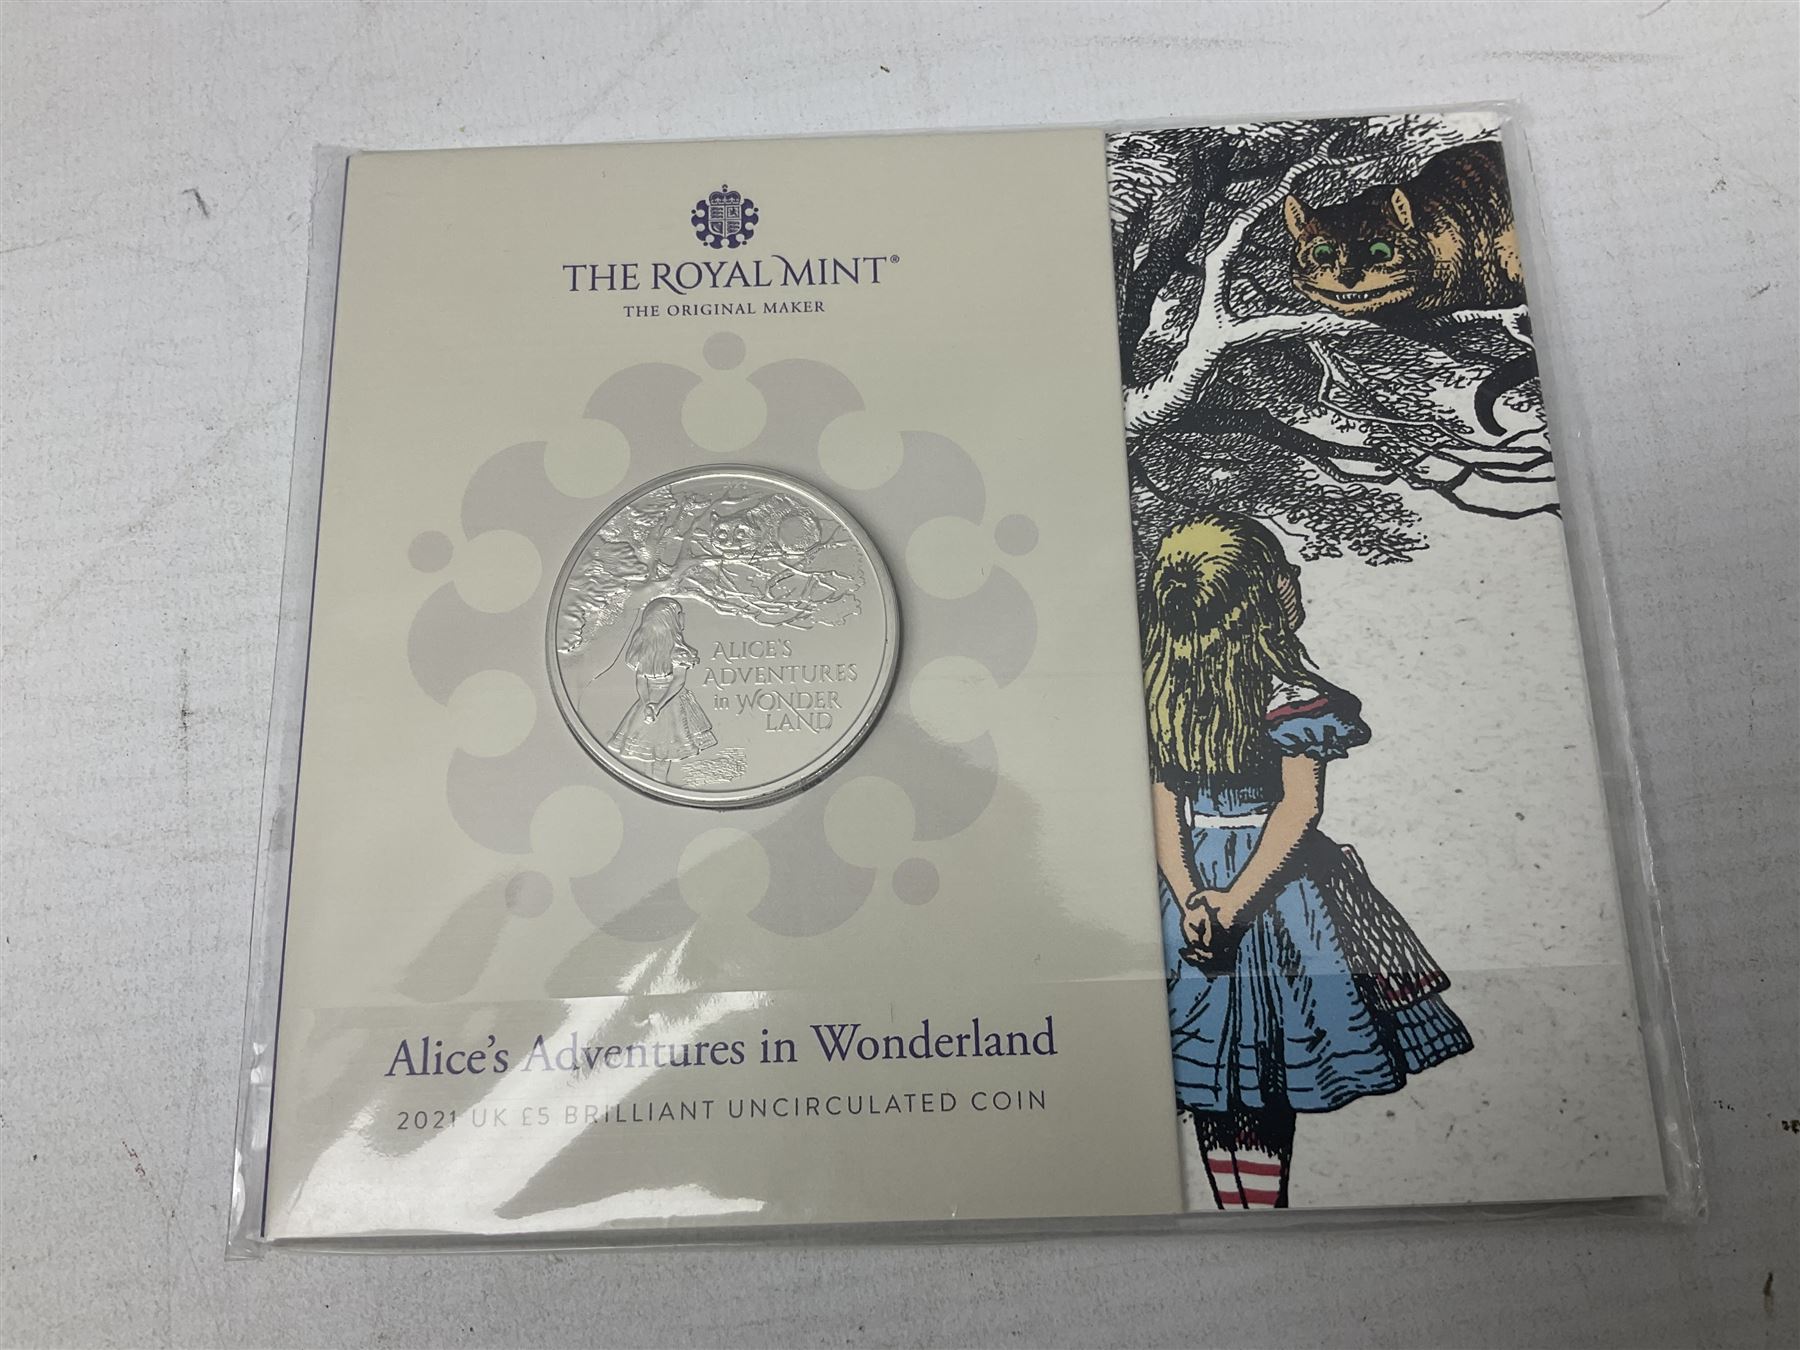 Seven The Royal Mint United Kingdom brilliant uncirculated commemorative five pound coins - Image 7 of 7